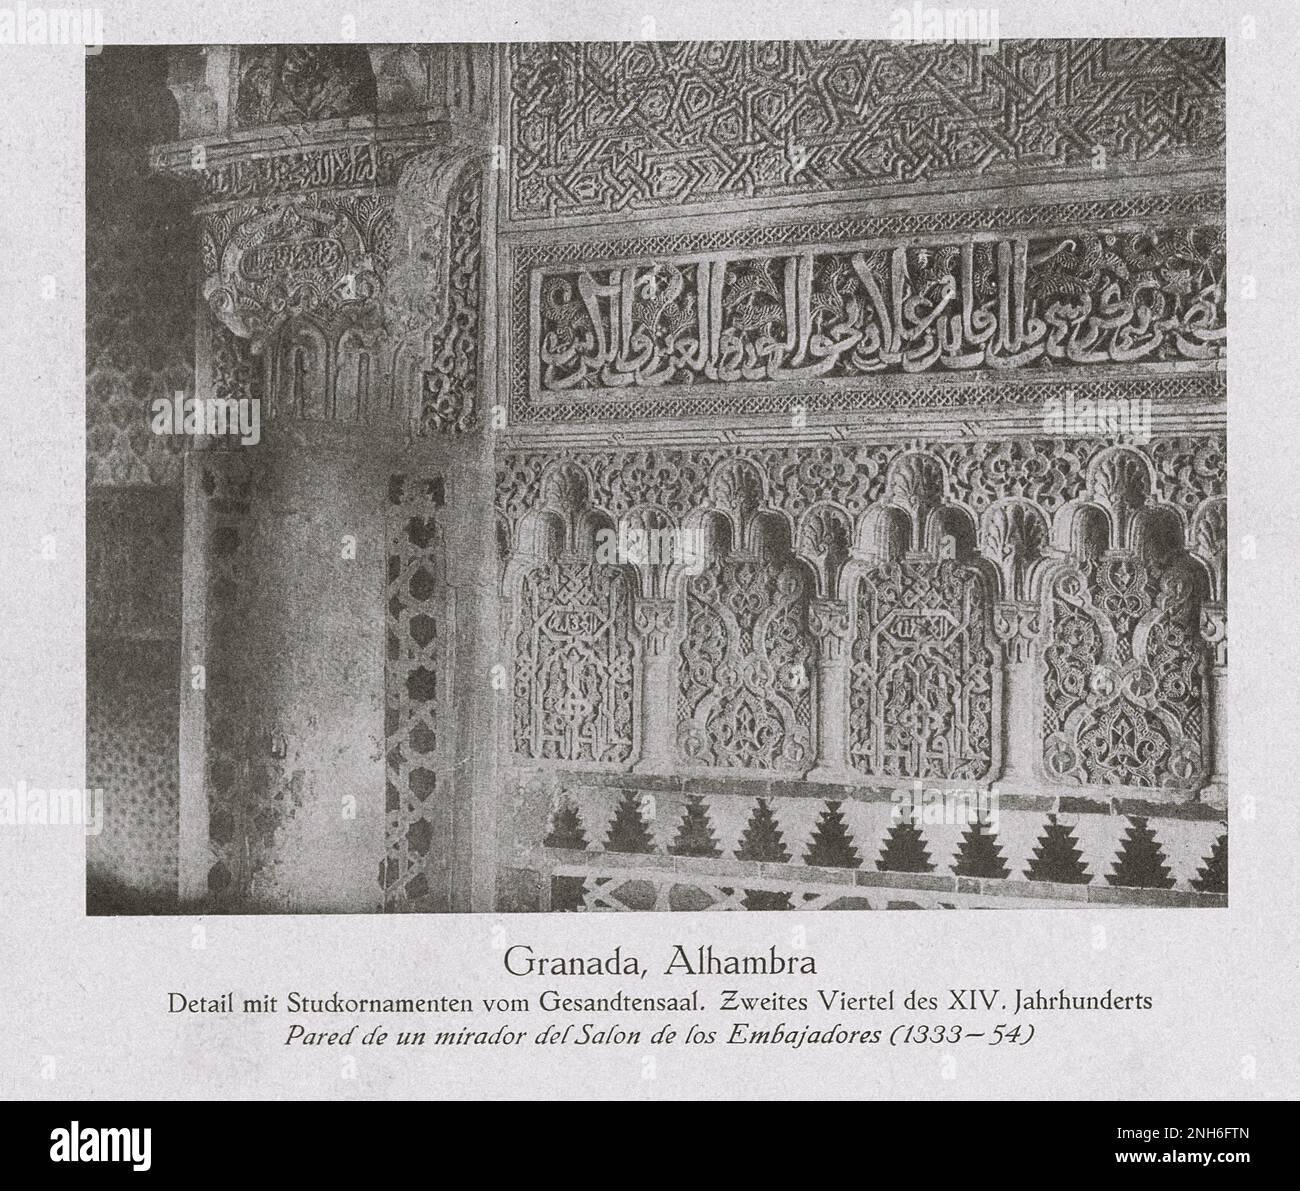 Architecture of Old Spain. Vintage photo of detail with stucco ornaments from Ambassadors’ Hall. Second quarter of the XIV century. Granada, Alhambra Stock Photo